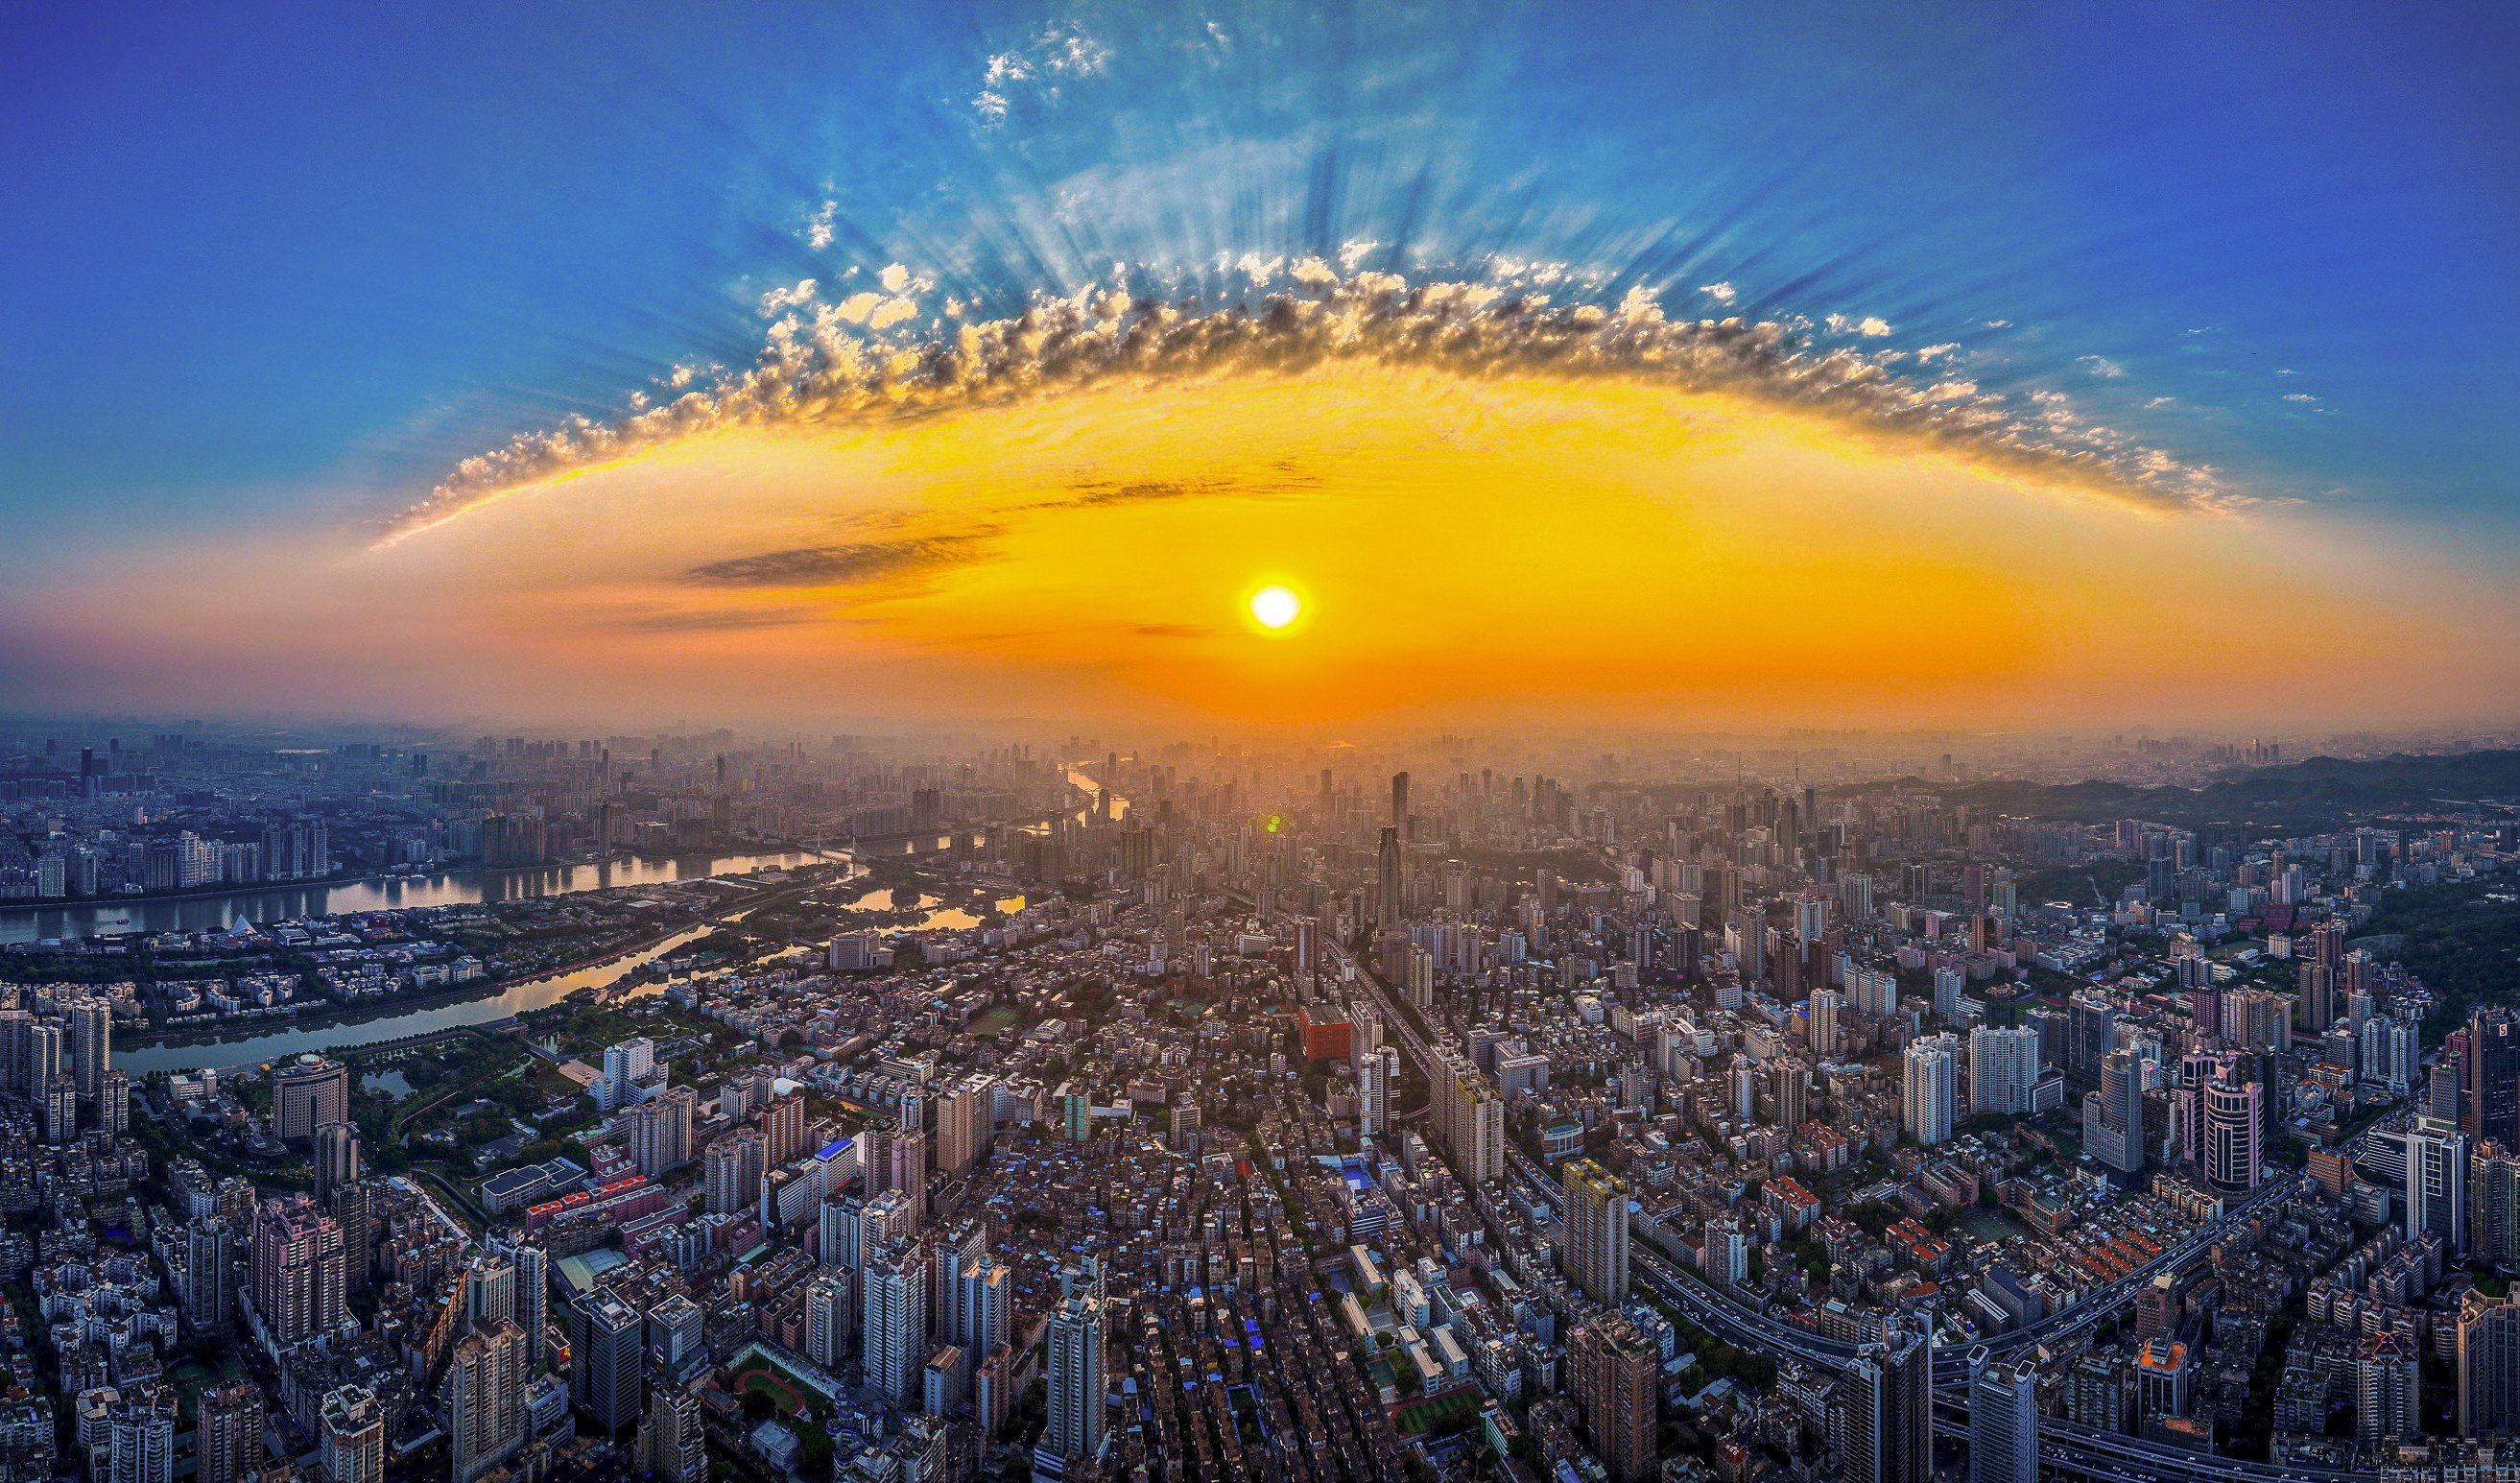 A fiery sunset over Guangzhou, where for a decade summer has arrived at an earlier date than the typical April 16. Photo: Xinhua